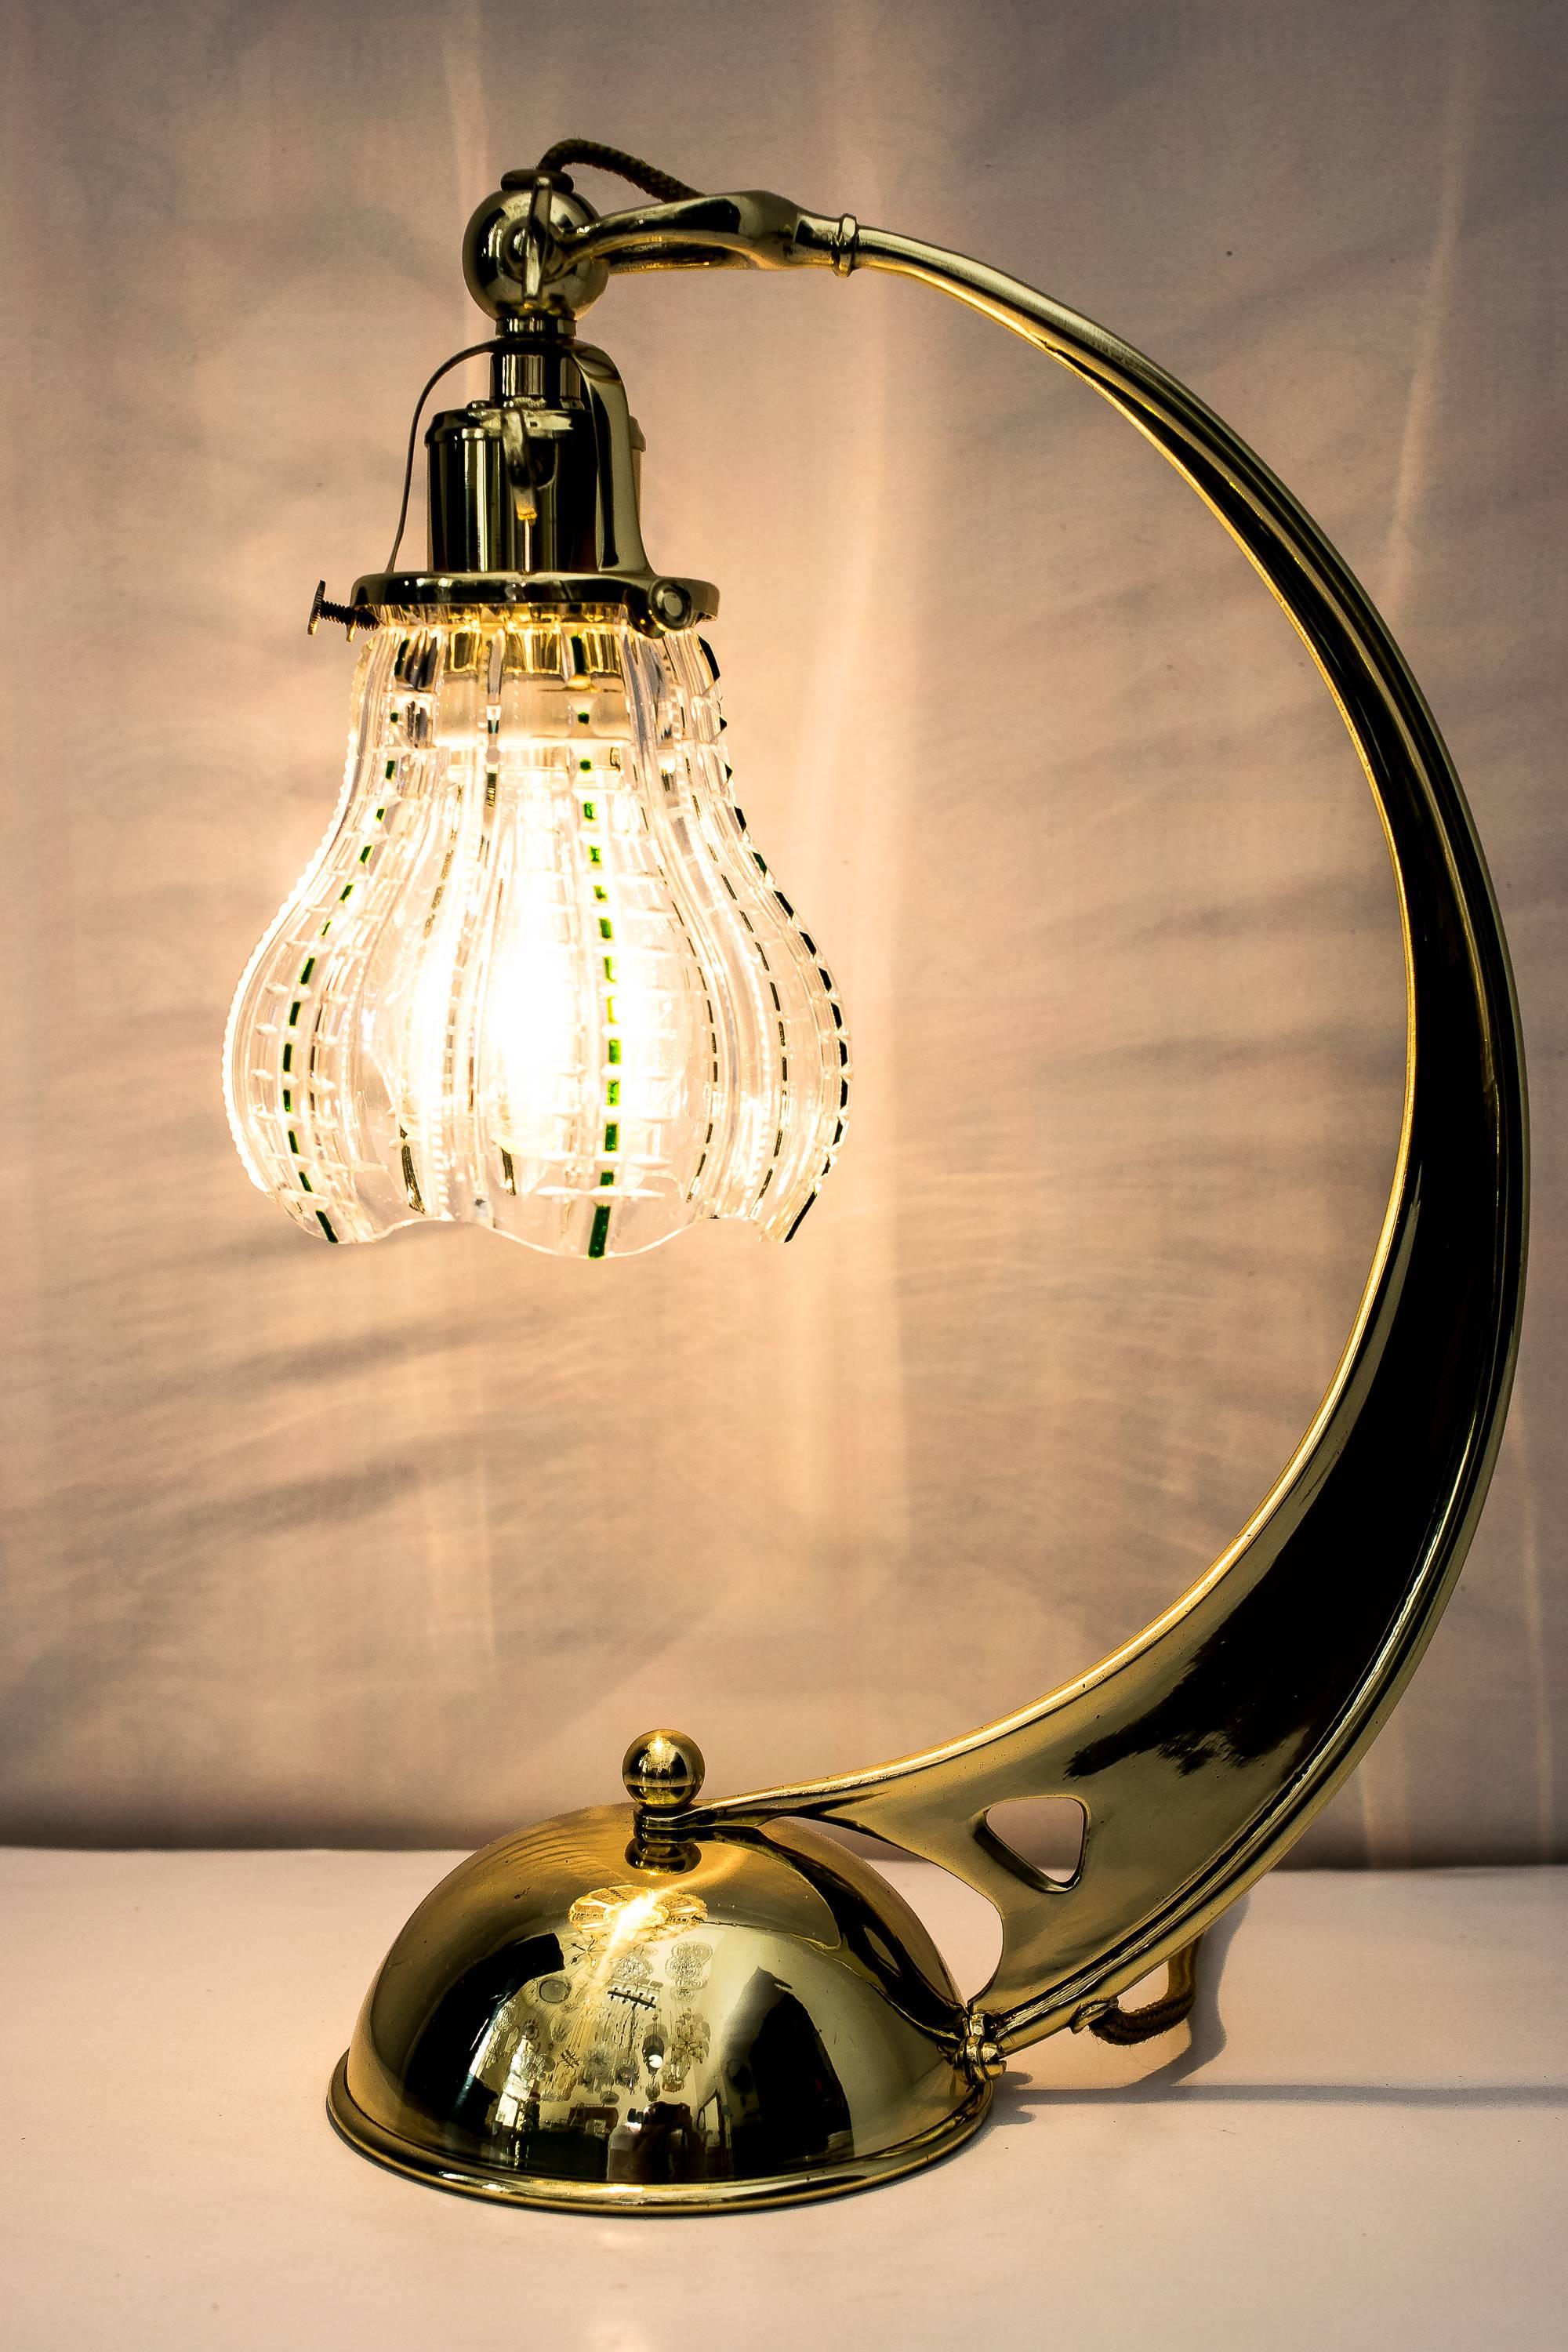 Early 20th Century Very Beautiful Jugendstil Table Lamp with Original Glass Shade